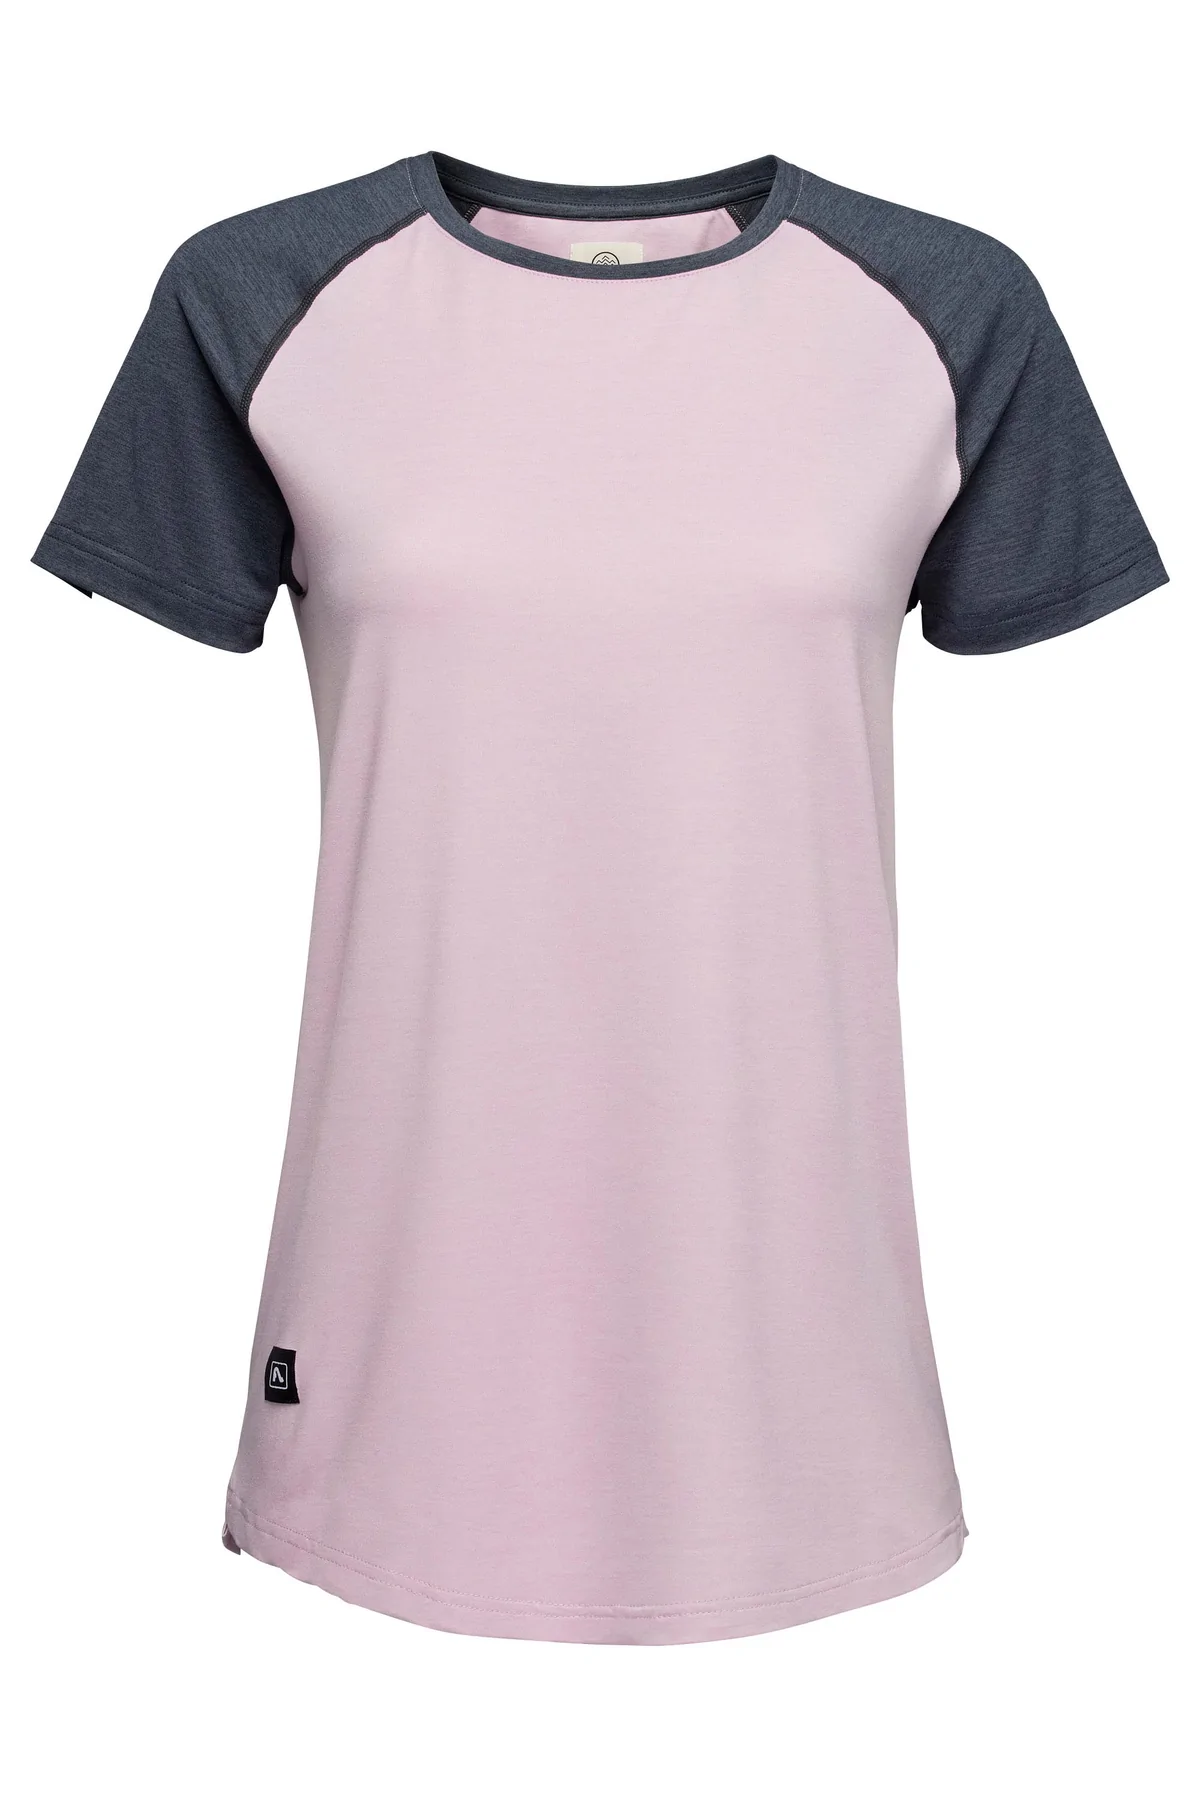 Kara Williard reviews the Flylow Jessi Shirt for BLISTER